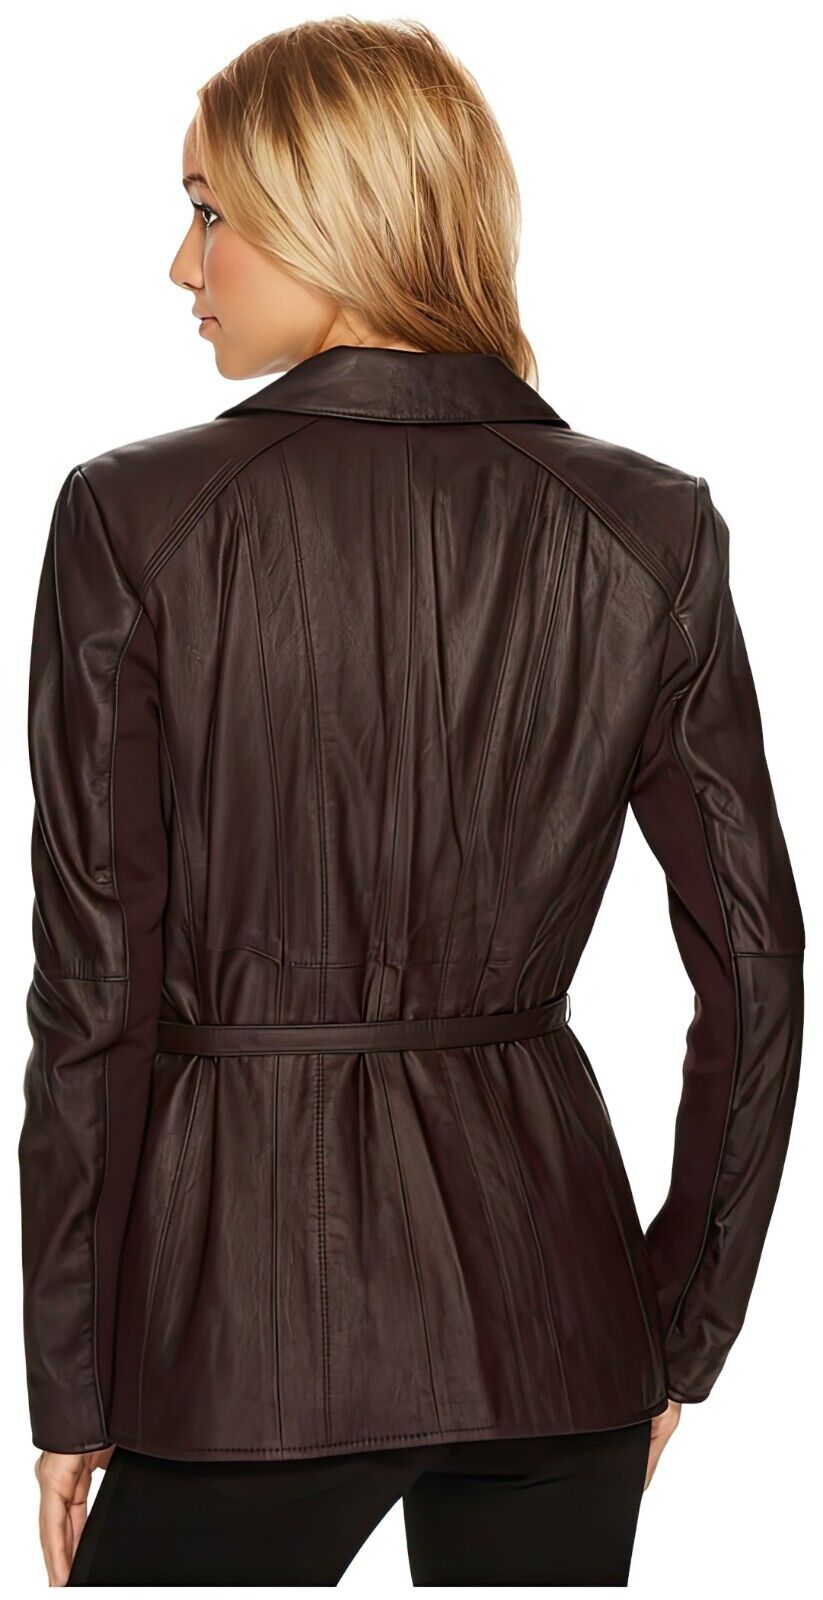 A woman showcasing the back view of a stylish brown goatskin leather jacket featuring a belted waist and detailed stitching, MARC NEW YORK ANDREW MARC Farley Belted Luxurious Genuine Leather Burgundy Jacket  S.